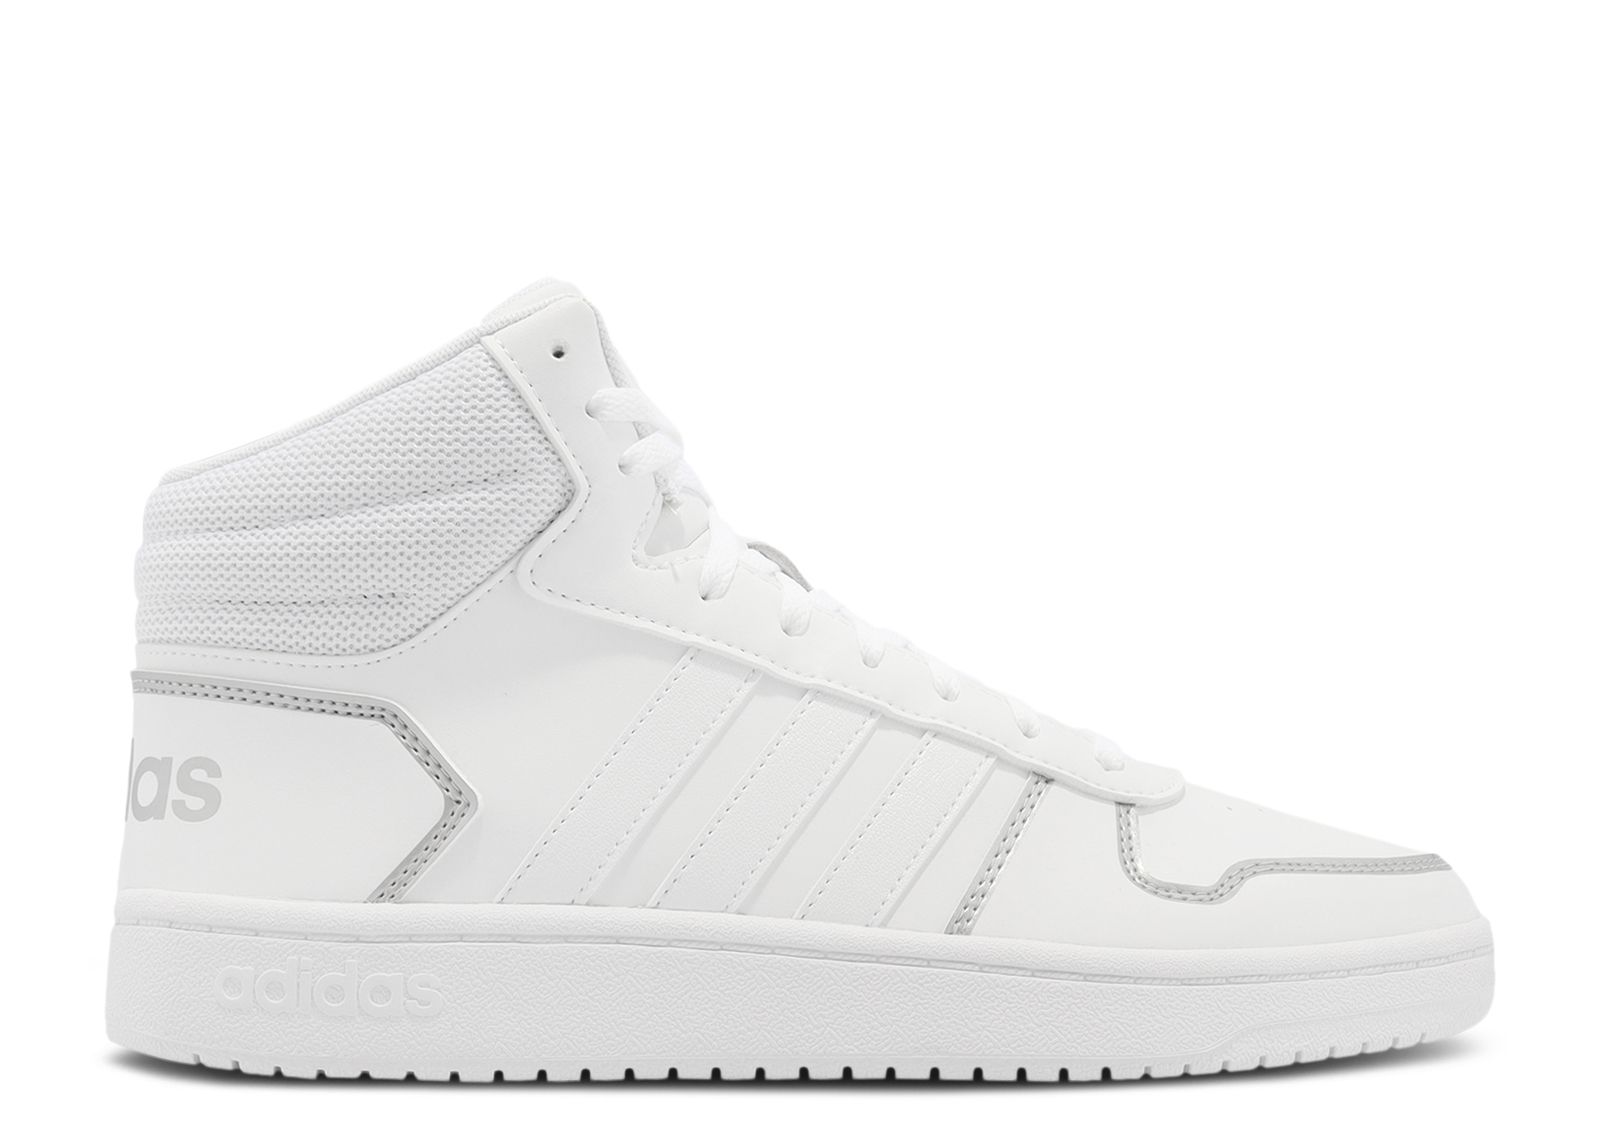 Wmns Hoops 2.0 Mid 'White Silver Metallic' - Adidas - FY6023 - cloud ...